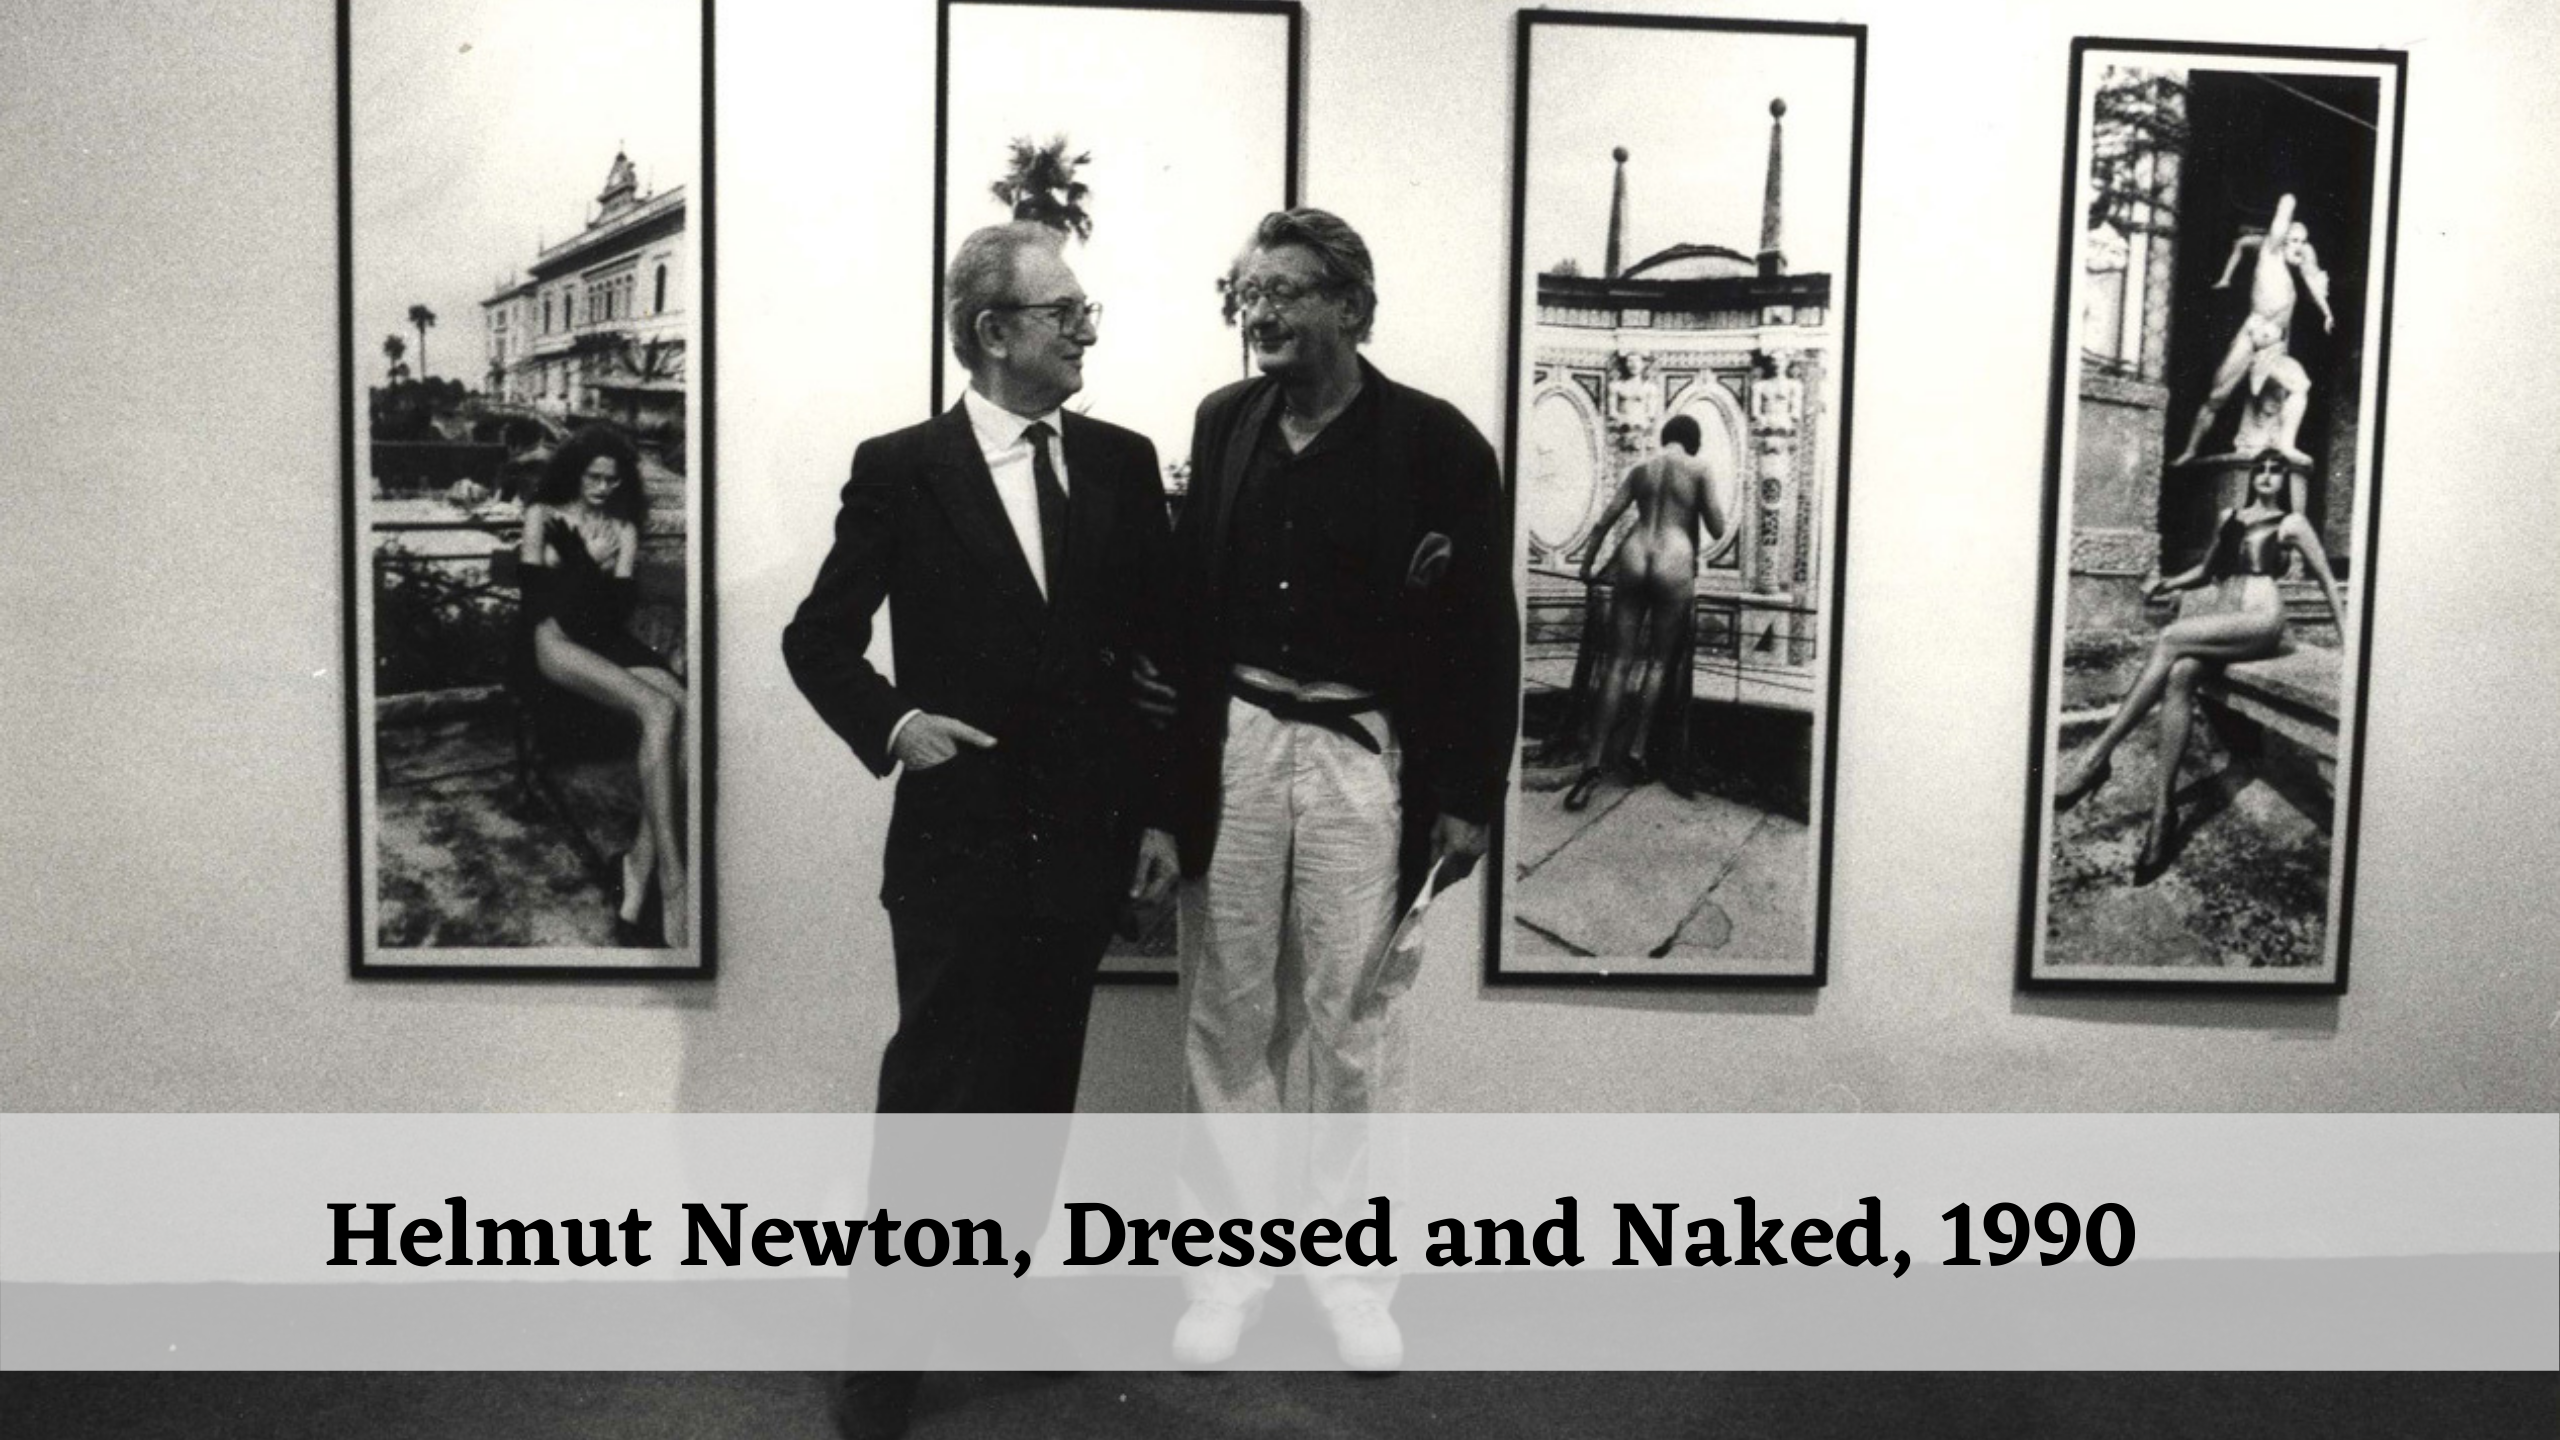 Helmut Newton, Dressed and Naked, 1990